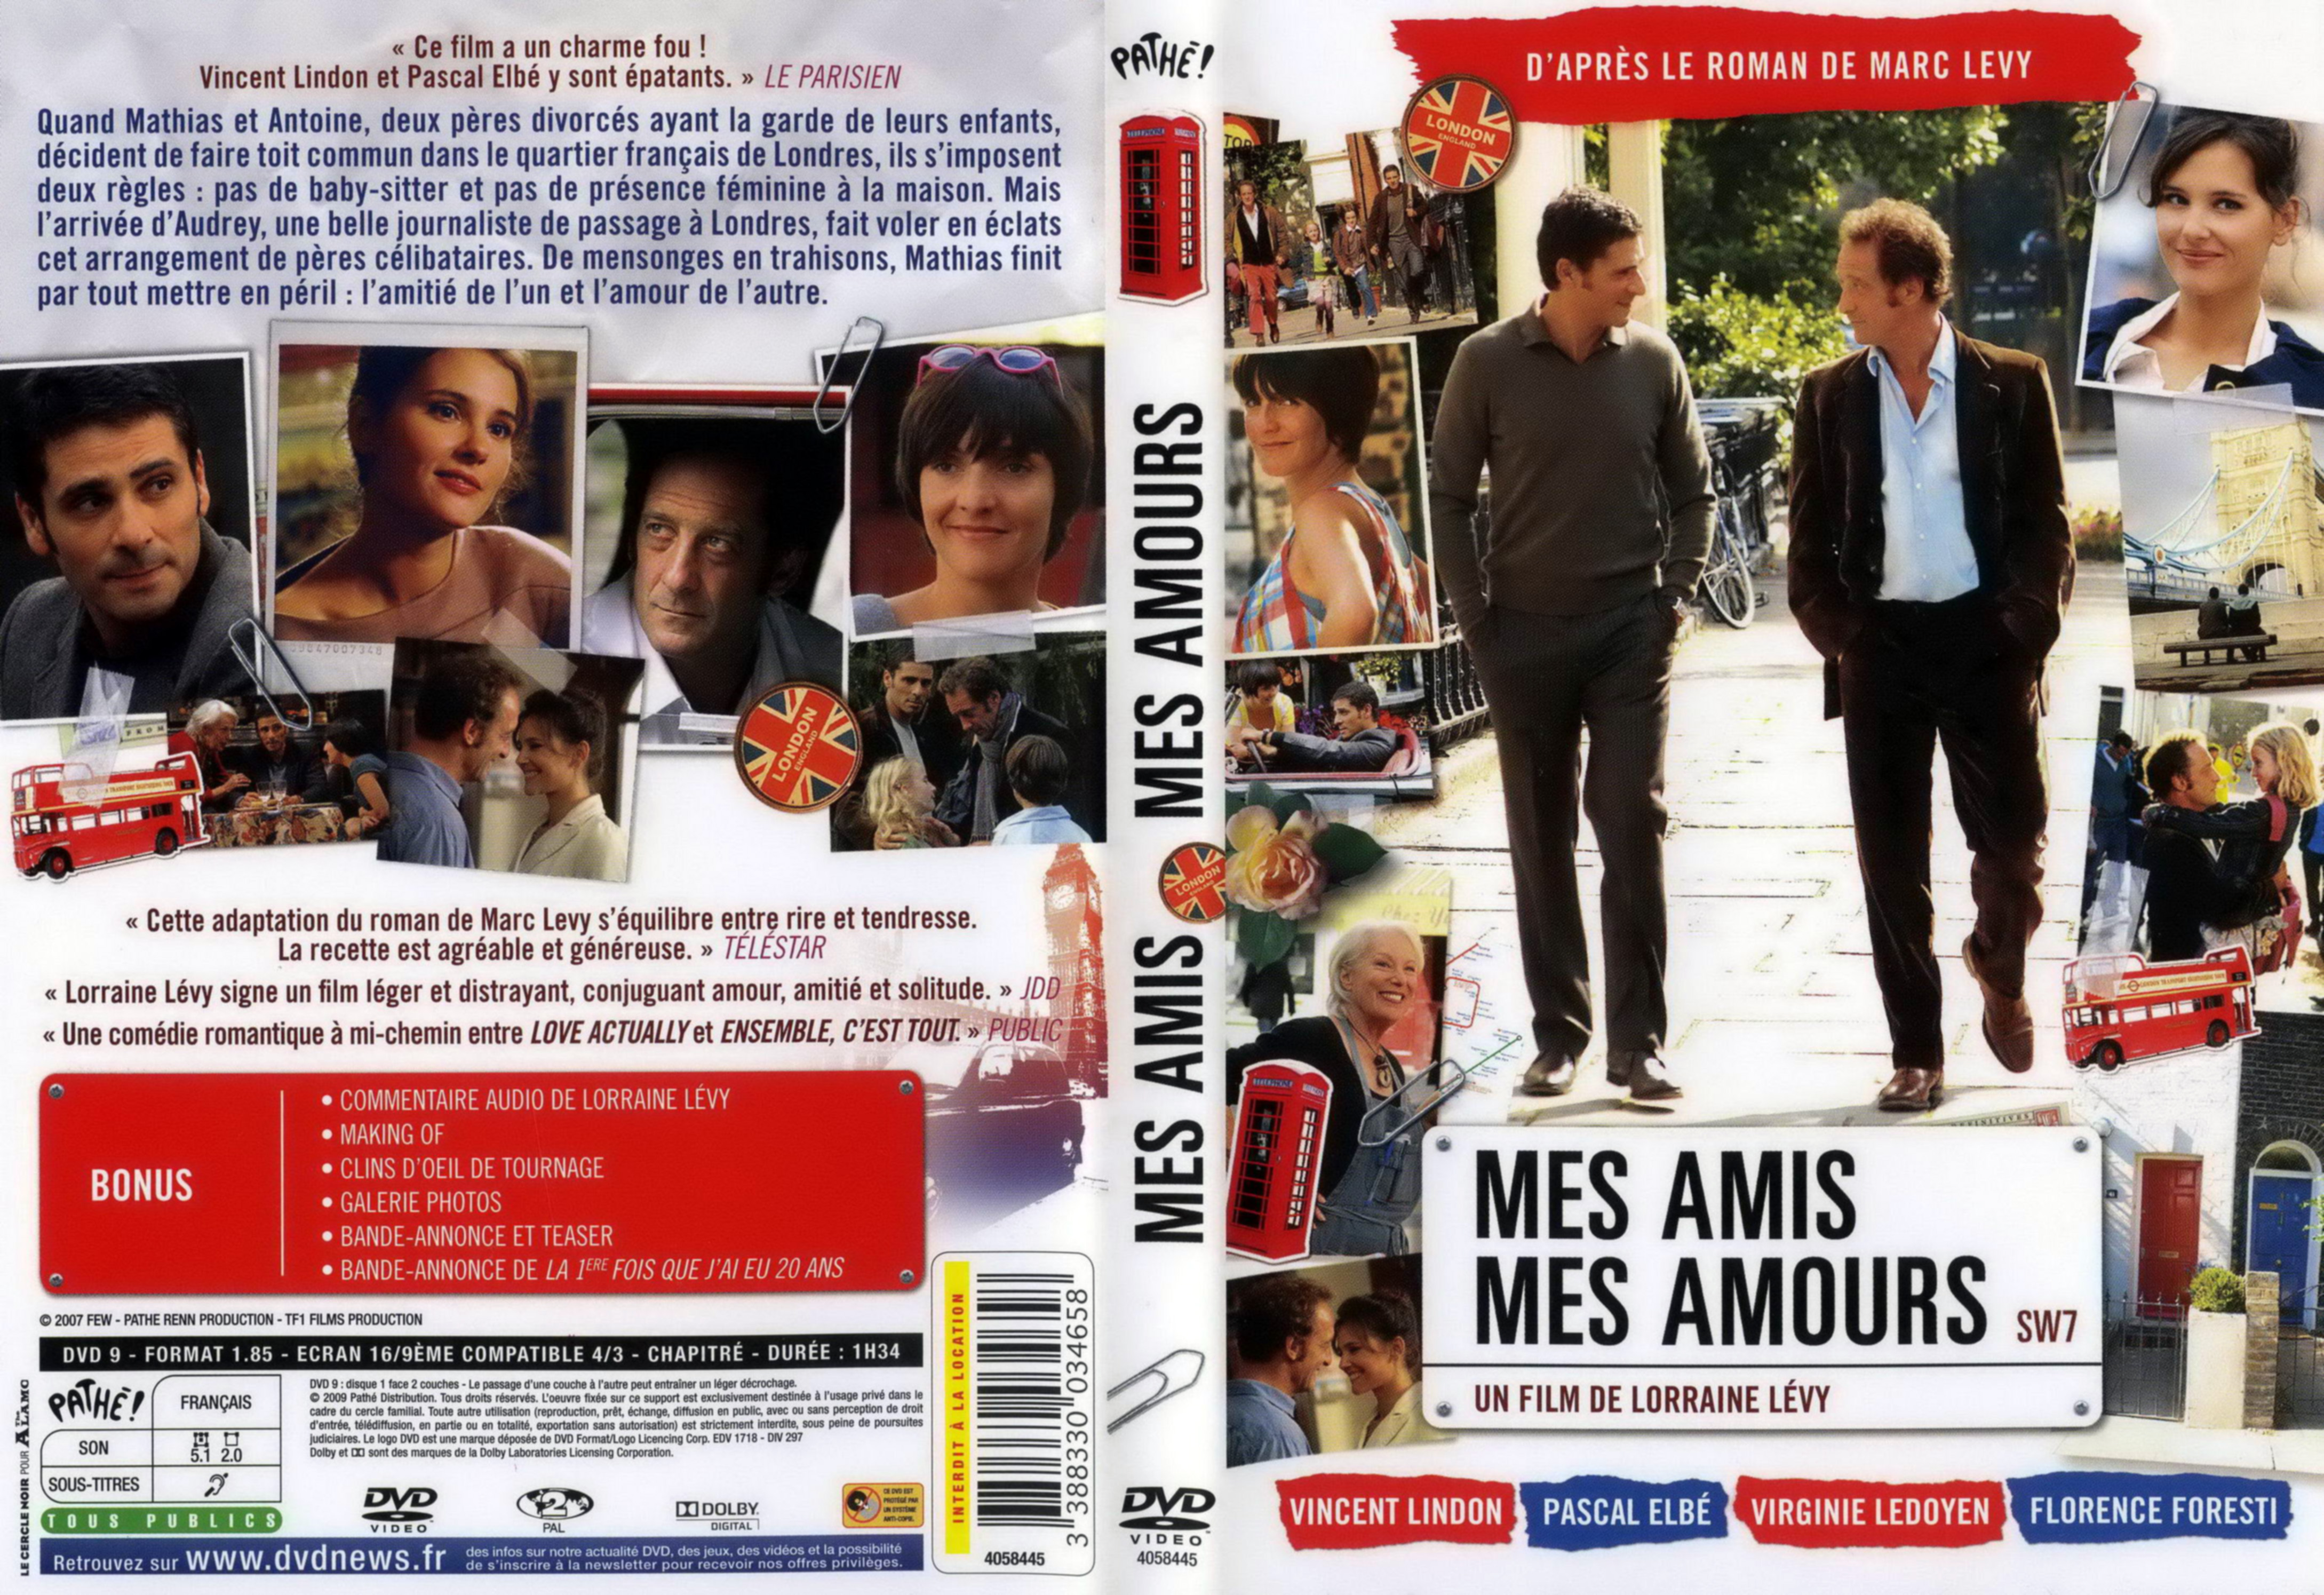 Jaquette DVD Mes amis mes amours v2